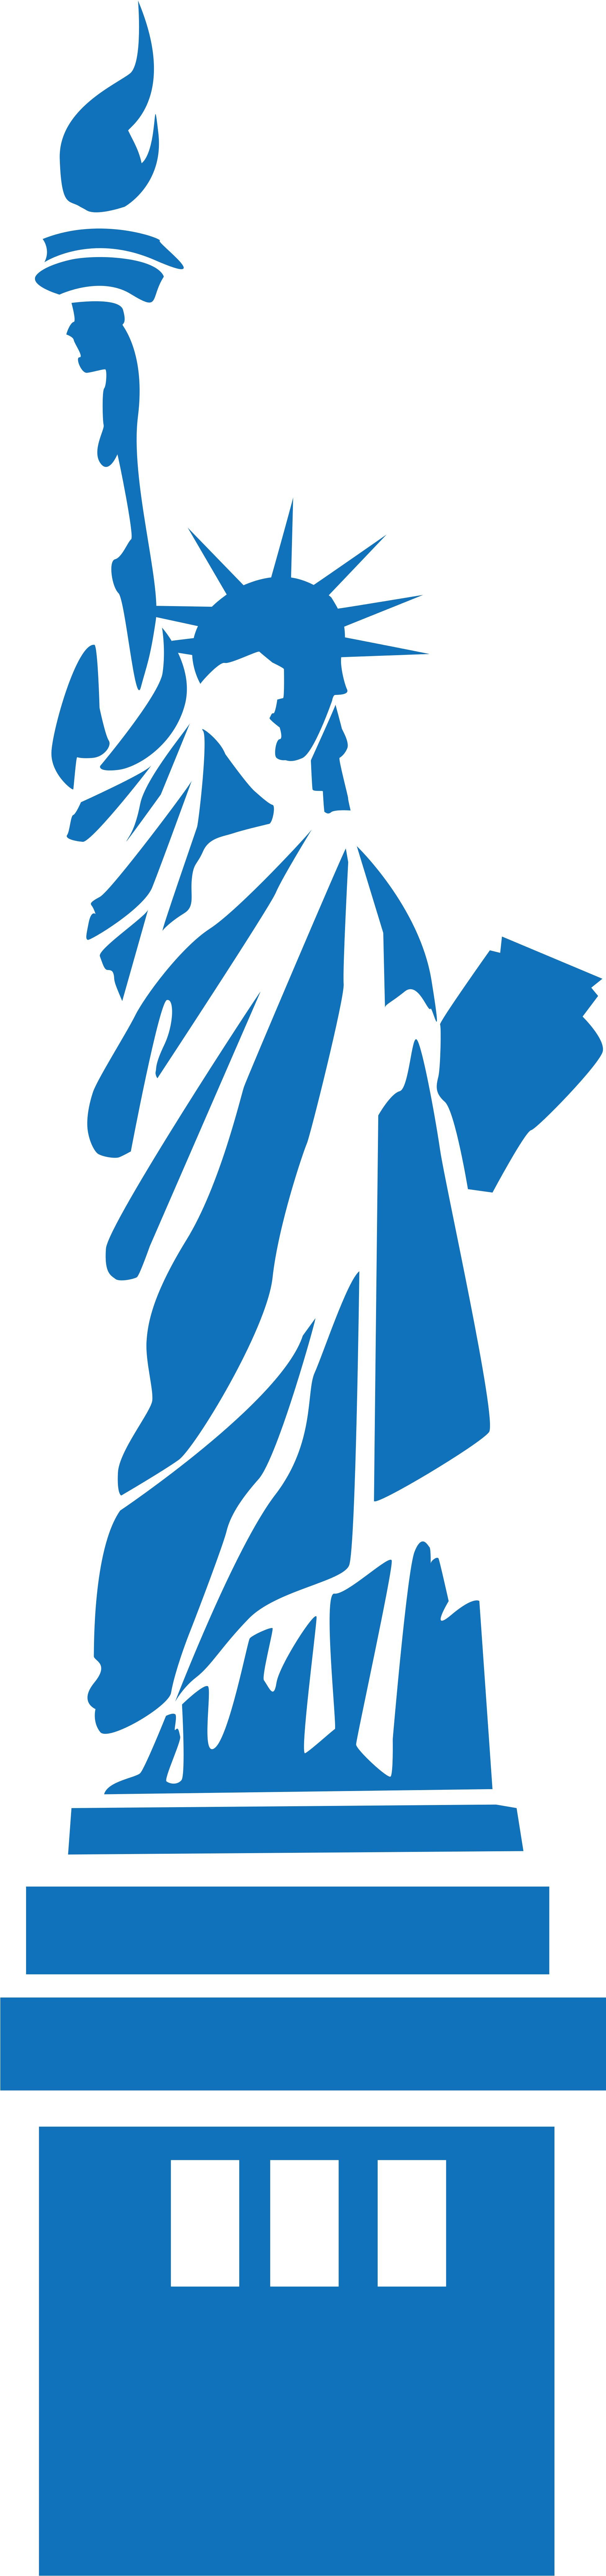 Related Coloring Pages - Statue Of Liberty Silhouette (2000x8492)